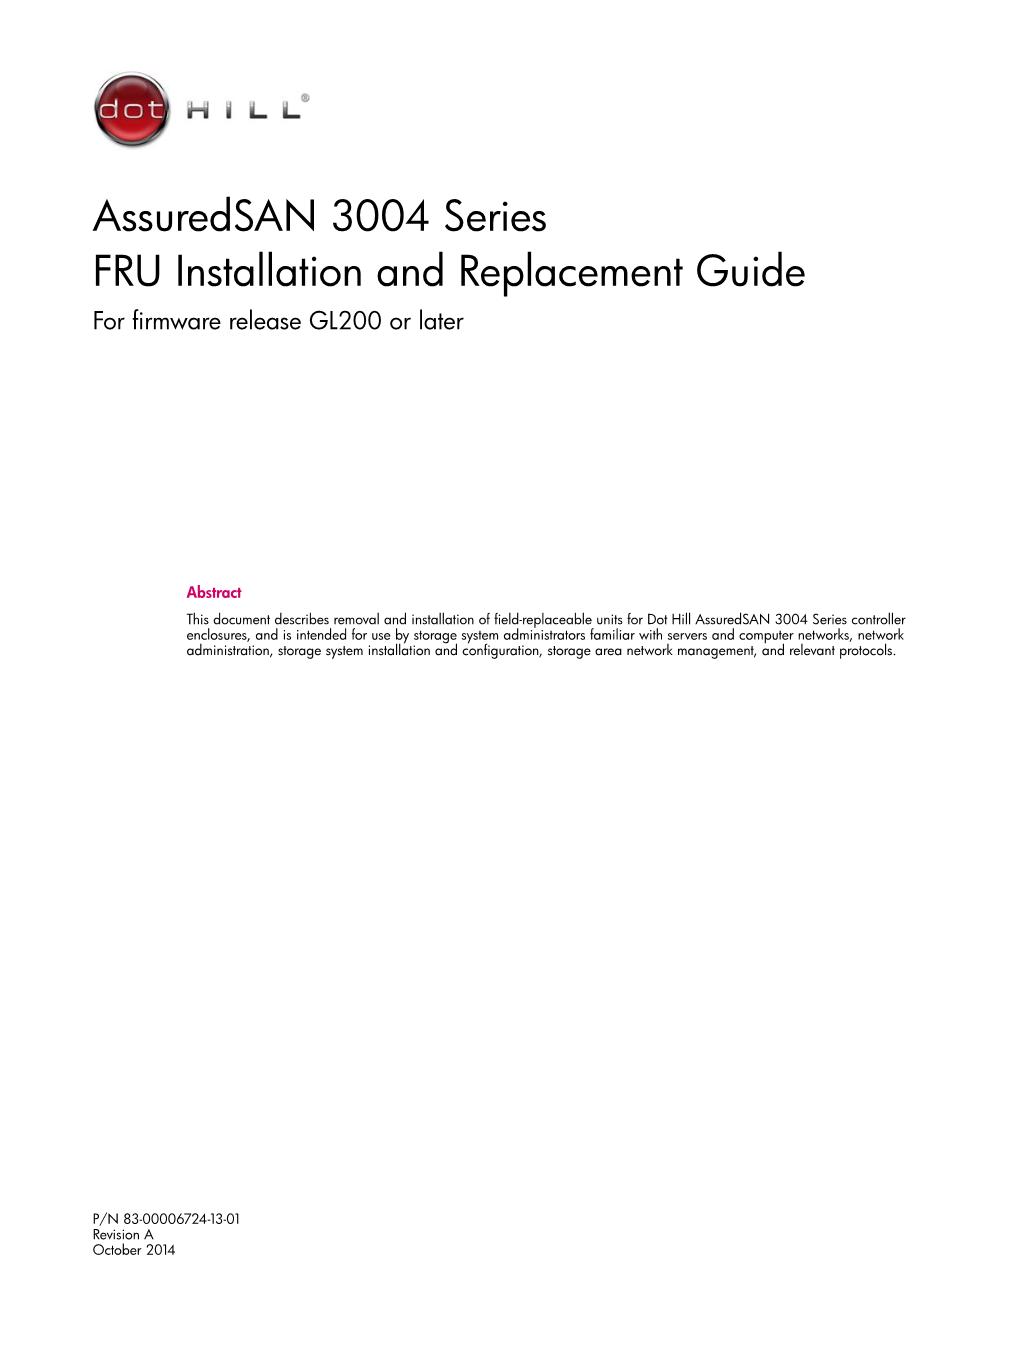 Assuredsan 3004 Series FRU Installation and Replacement Guide for Firmware Release GL200 Or Later